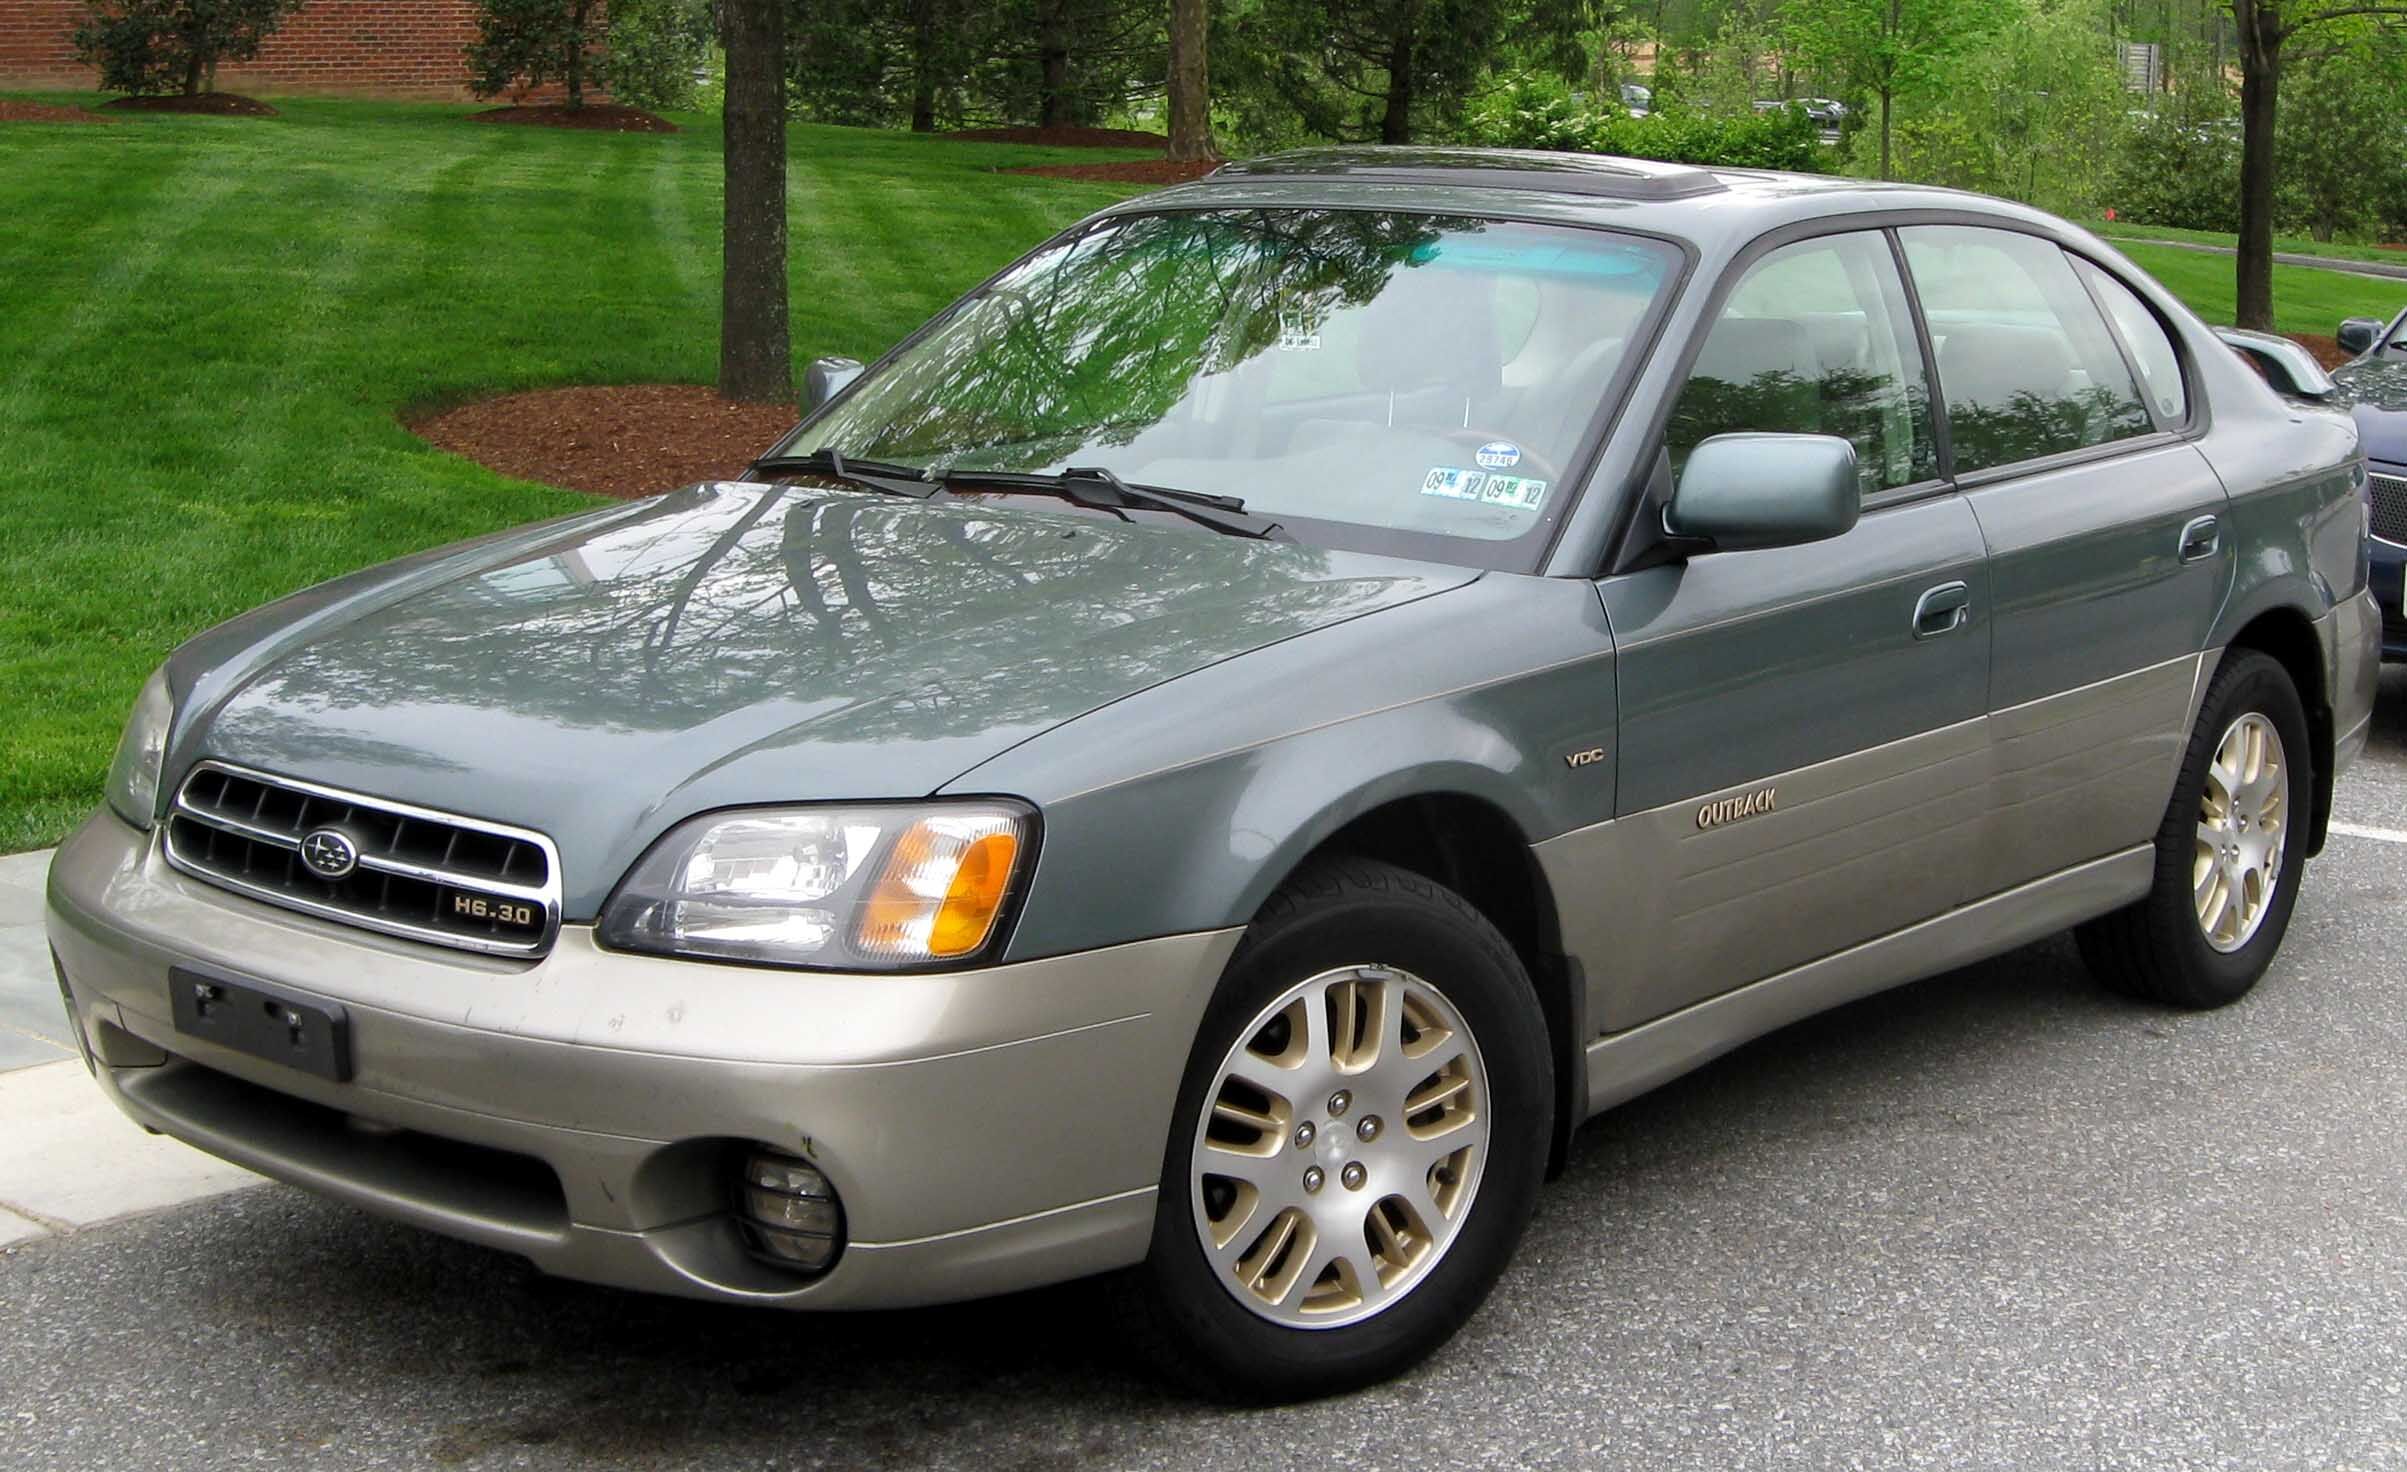 Subaru Outback, Tractor & Construction Plant Wiki